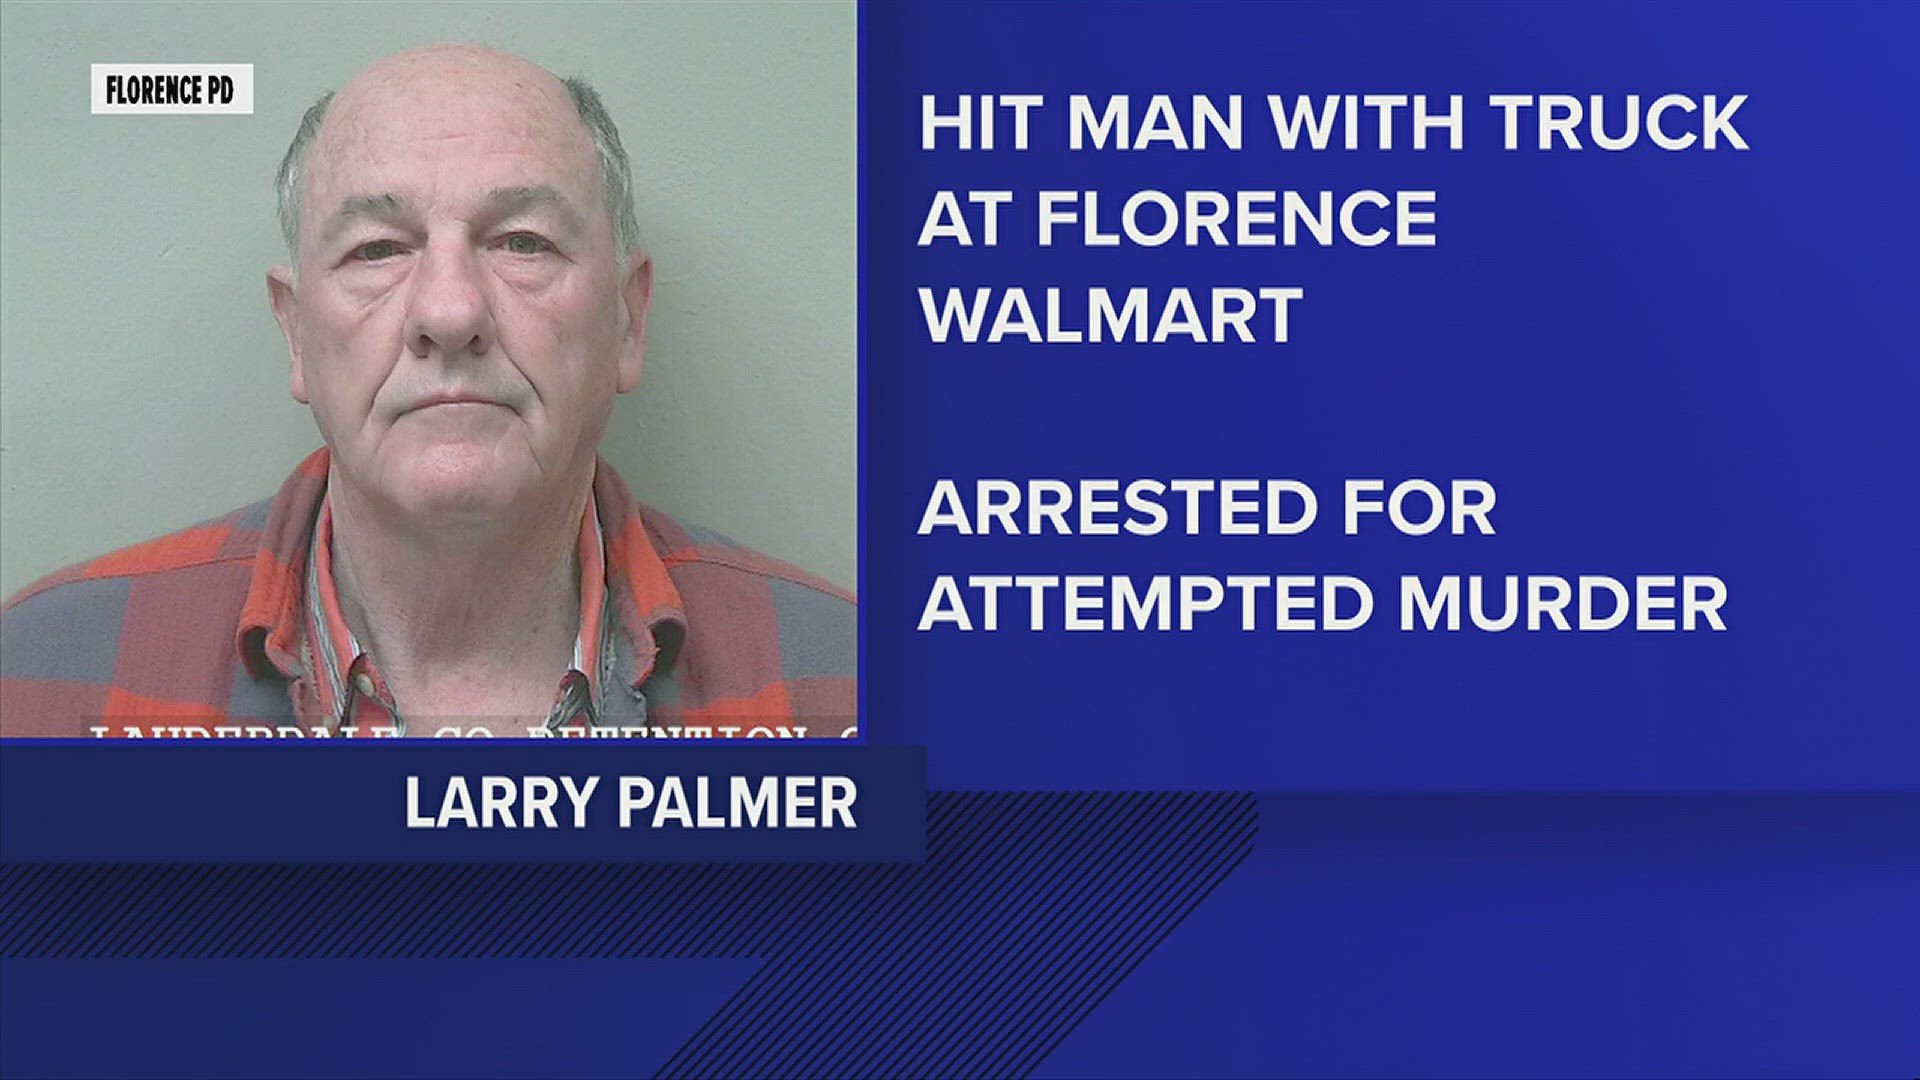 Police say Larry Palmer allegedly hit a man in a Walmart parking lot and then confronted the victim with a gun.